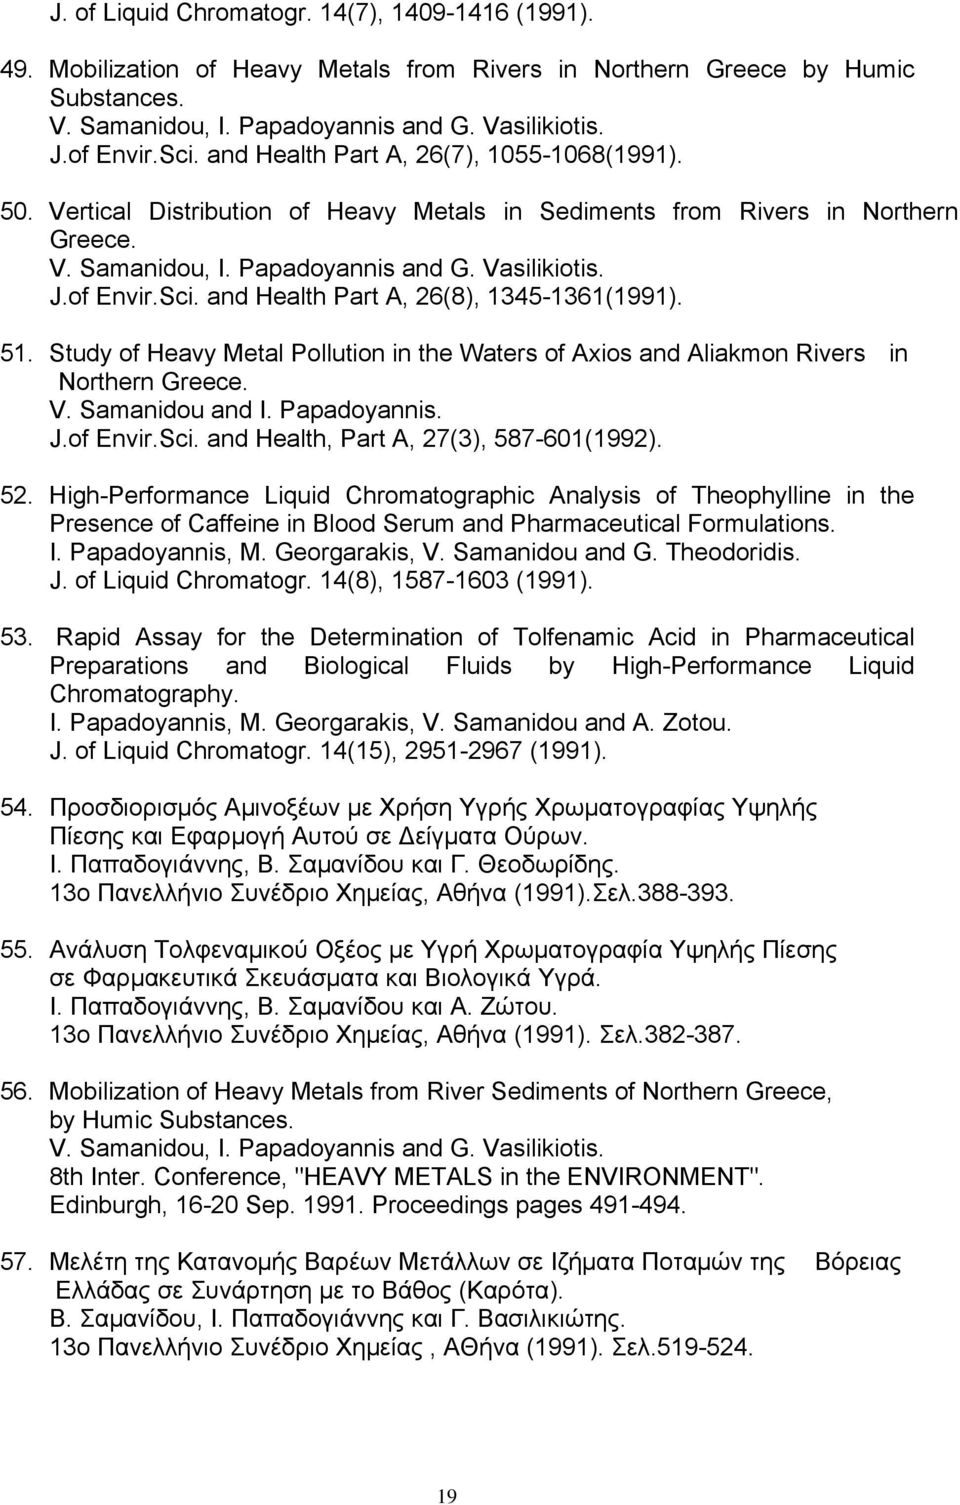 Sci. and Health Part A, 26(8), 1345-1361(1991). 51. Study of Heavy Metal Pollution in the Waters of Axios and Aliakmon Rivers in Northern Greece. V. Samanidou and I. Papadoyannis. J.of Envir.Sci. and Health, Part A, 27(3), 587-601(1992).